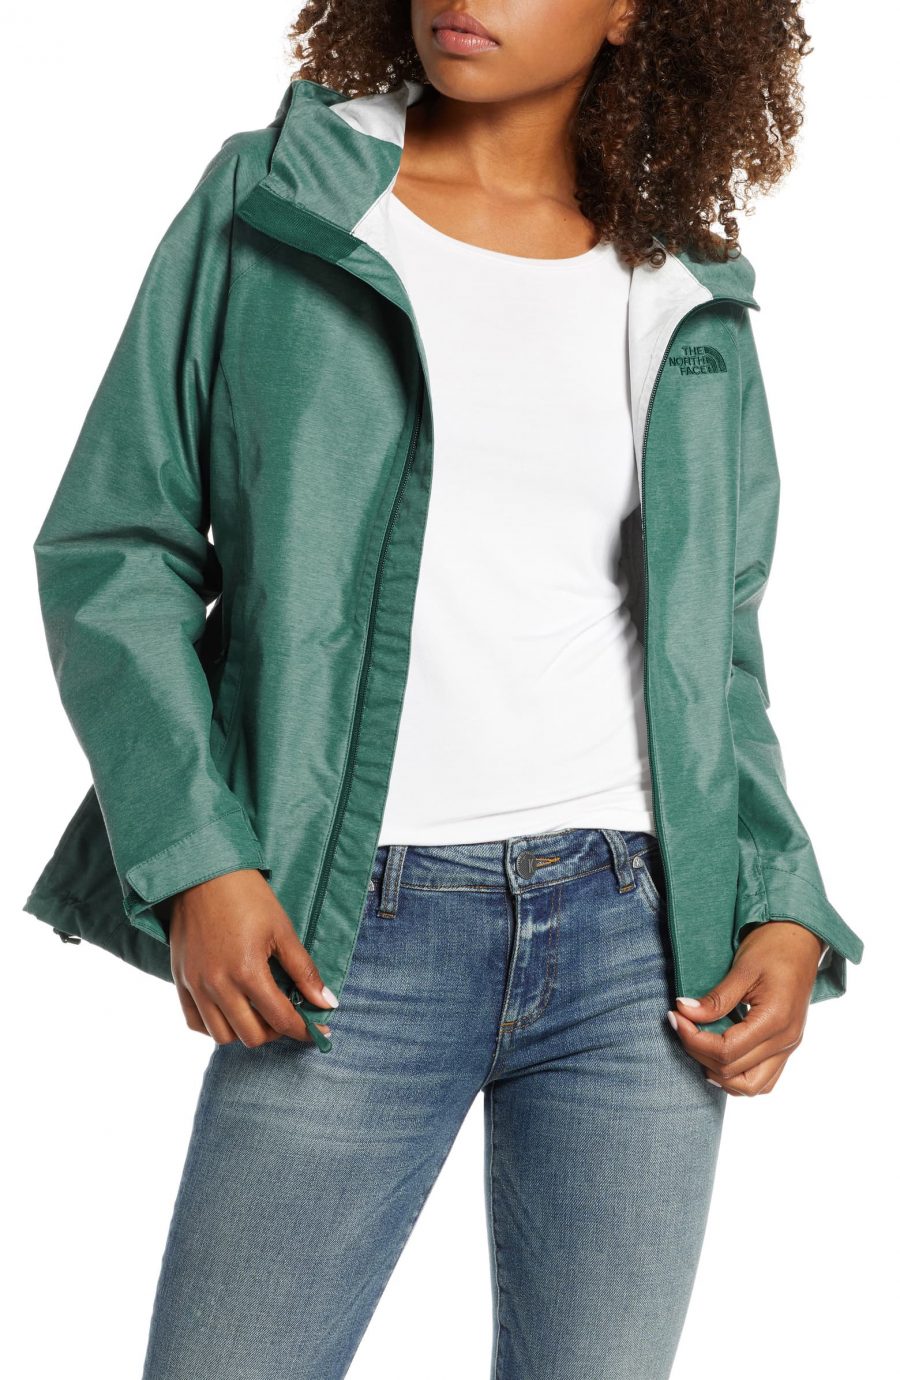 Labor Day Weekend Sales, North Face rain jacket